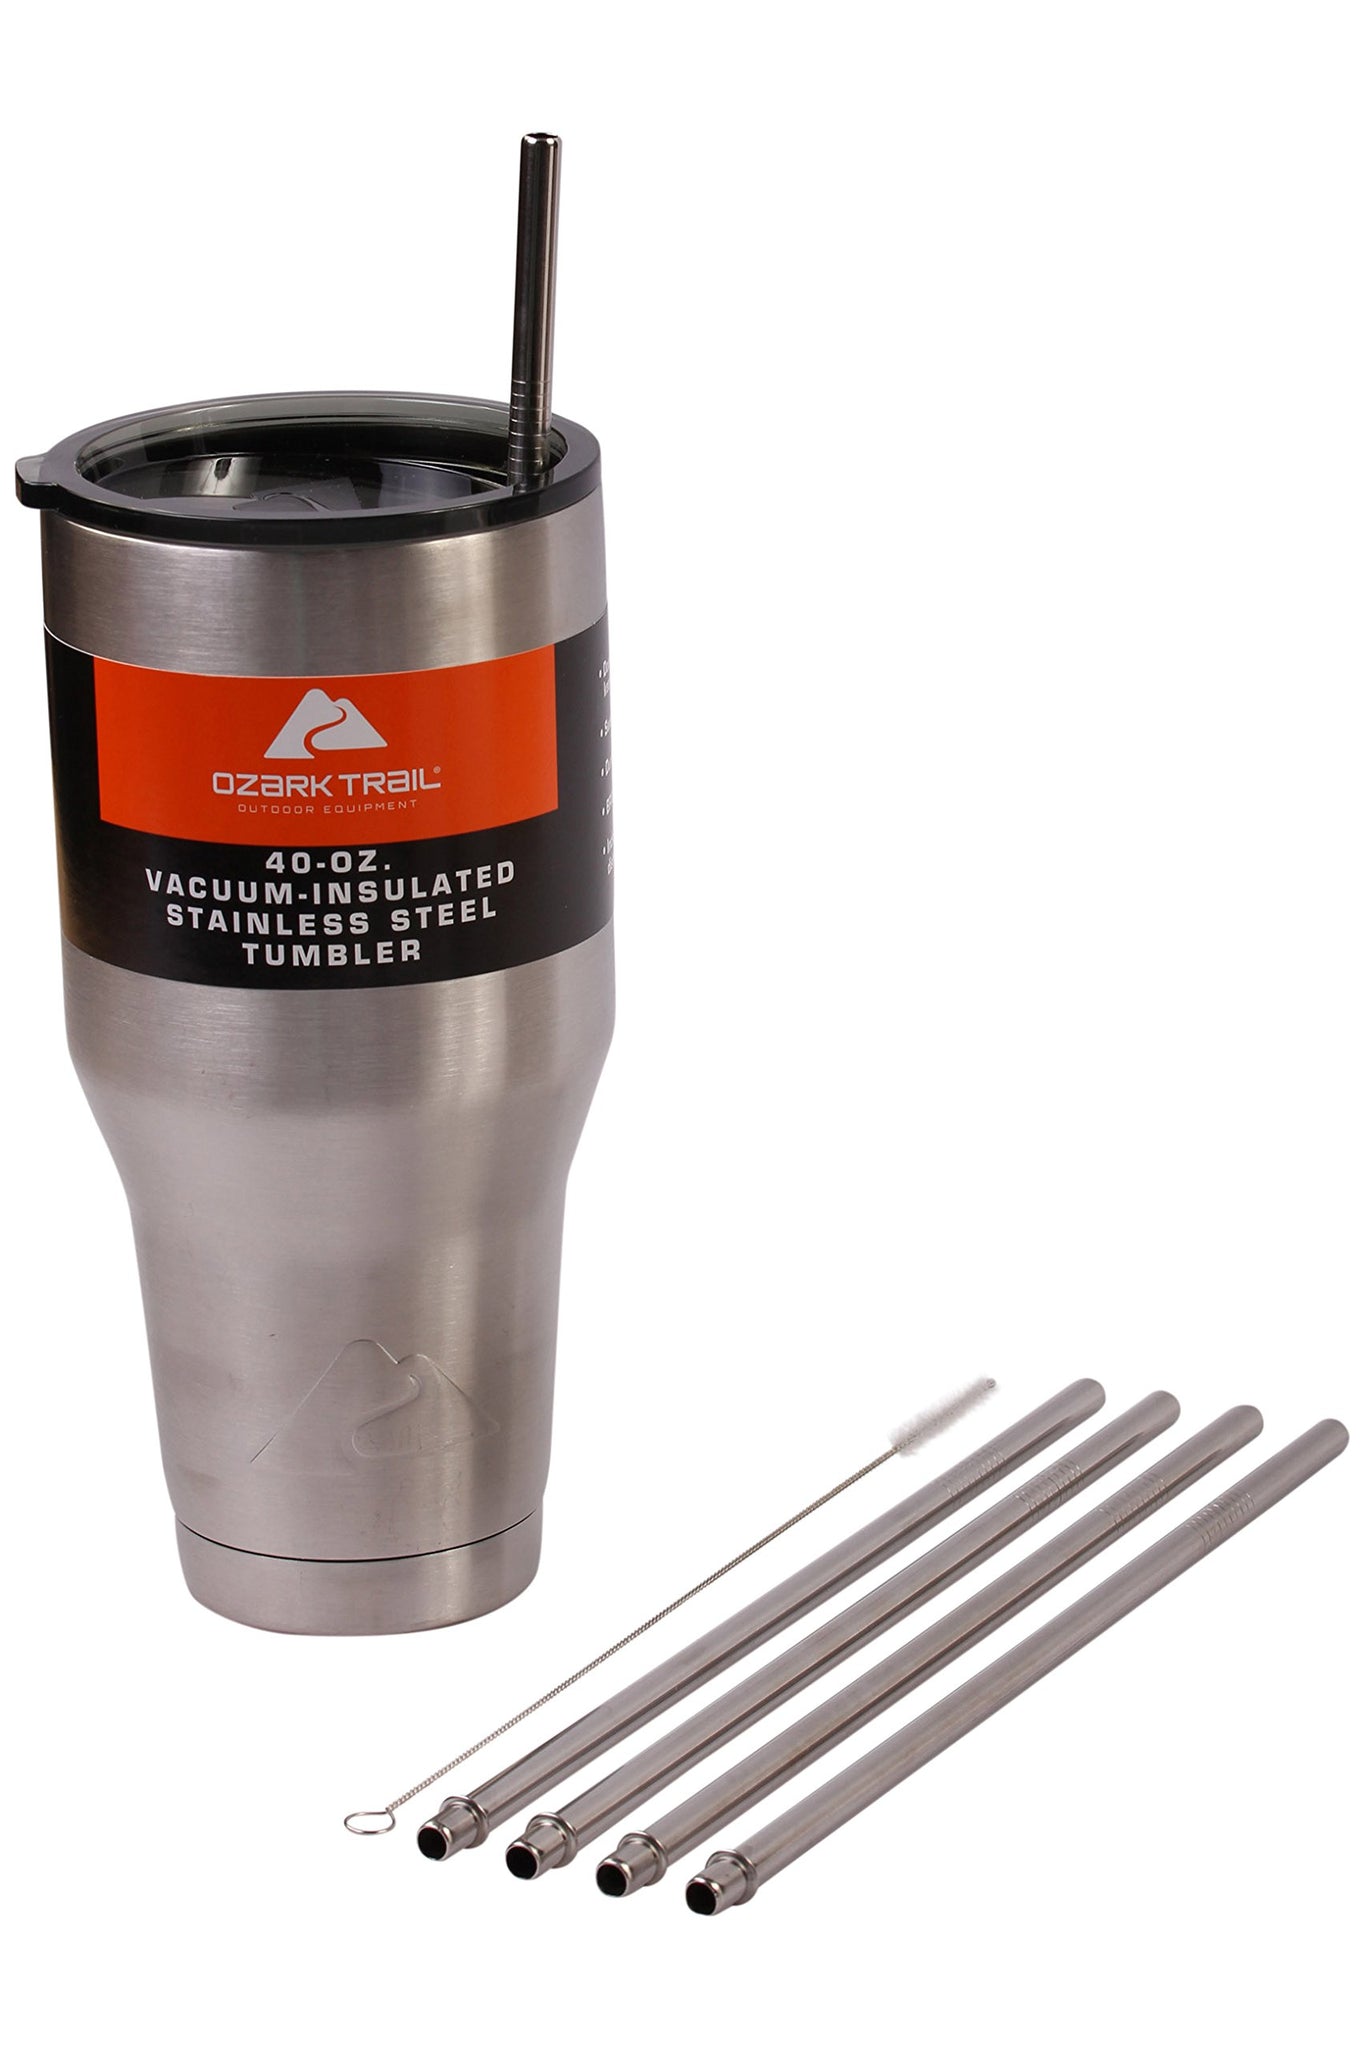 4 Bend Stainless Steel Straws Rocky Mountain 30 Ounce Double-Wall Tumbler Vacuum Cup - CocoStraw Brand Drinking Straw TV